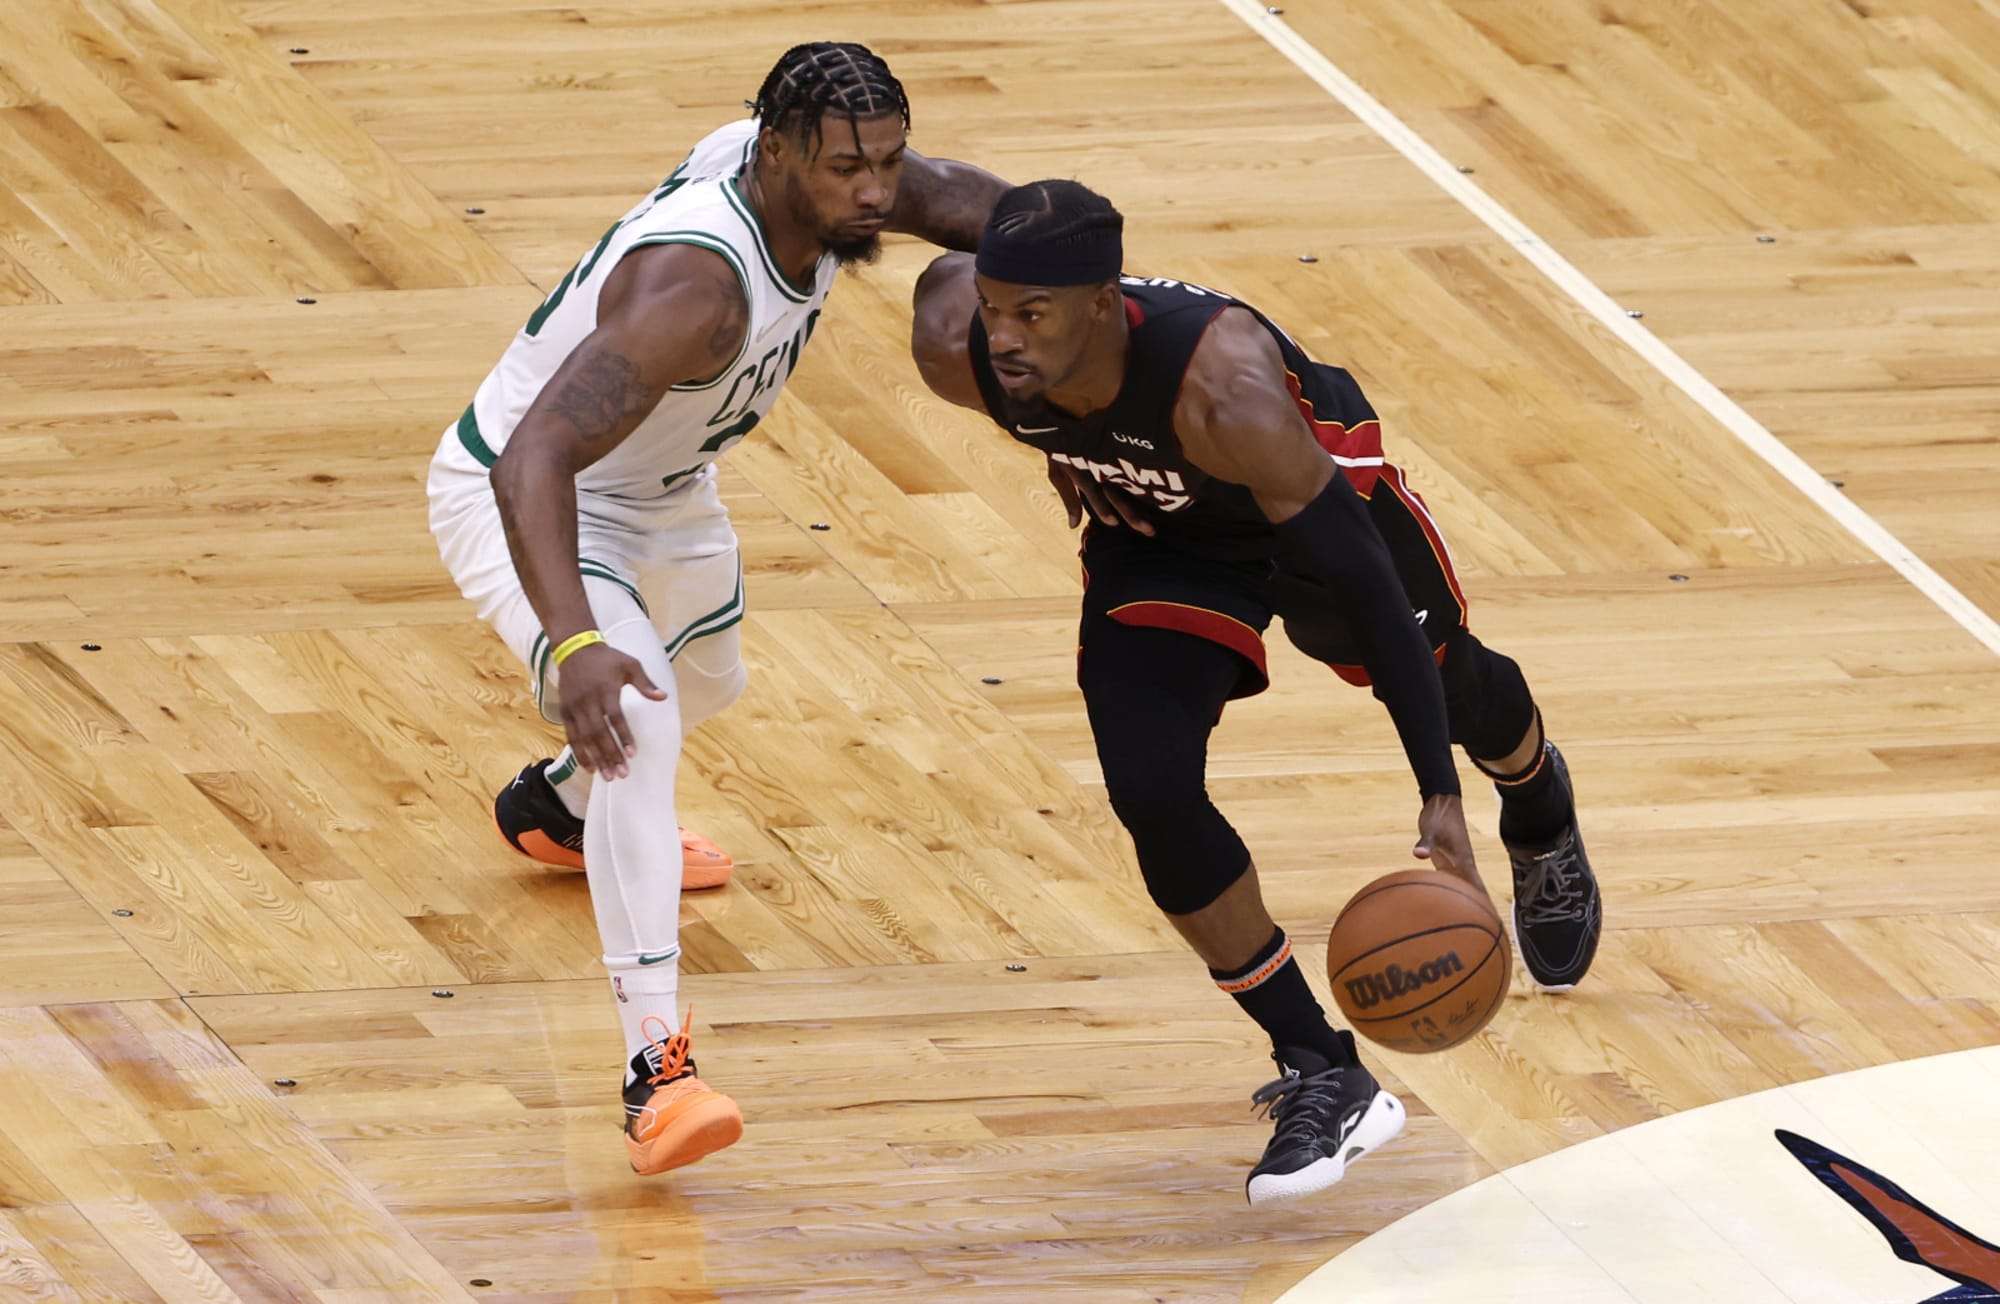 Celtics vs. Heat Game 4 Odds: Prediction, pick, how to watch NBA